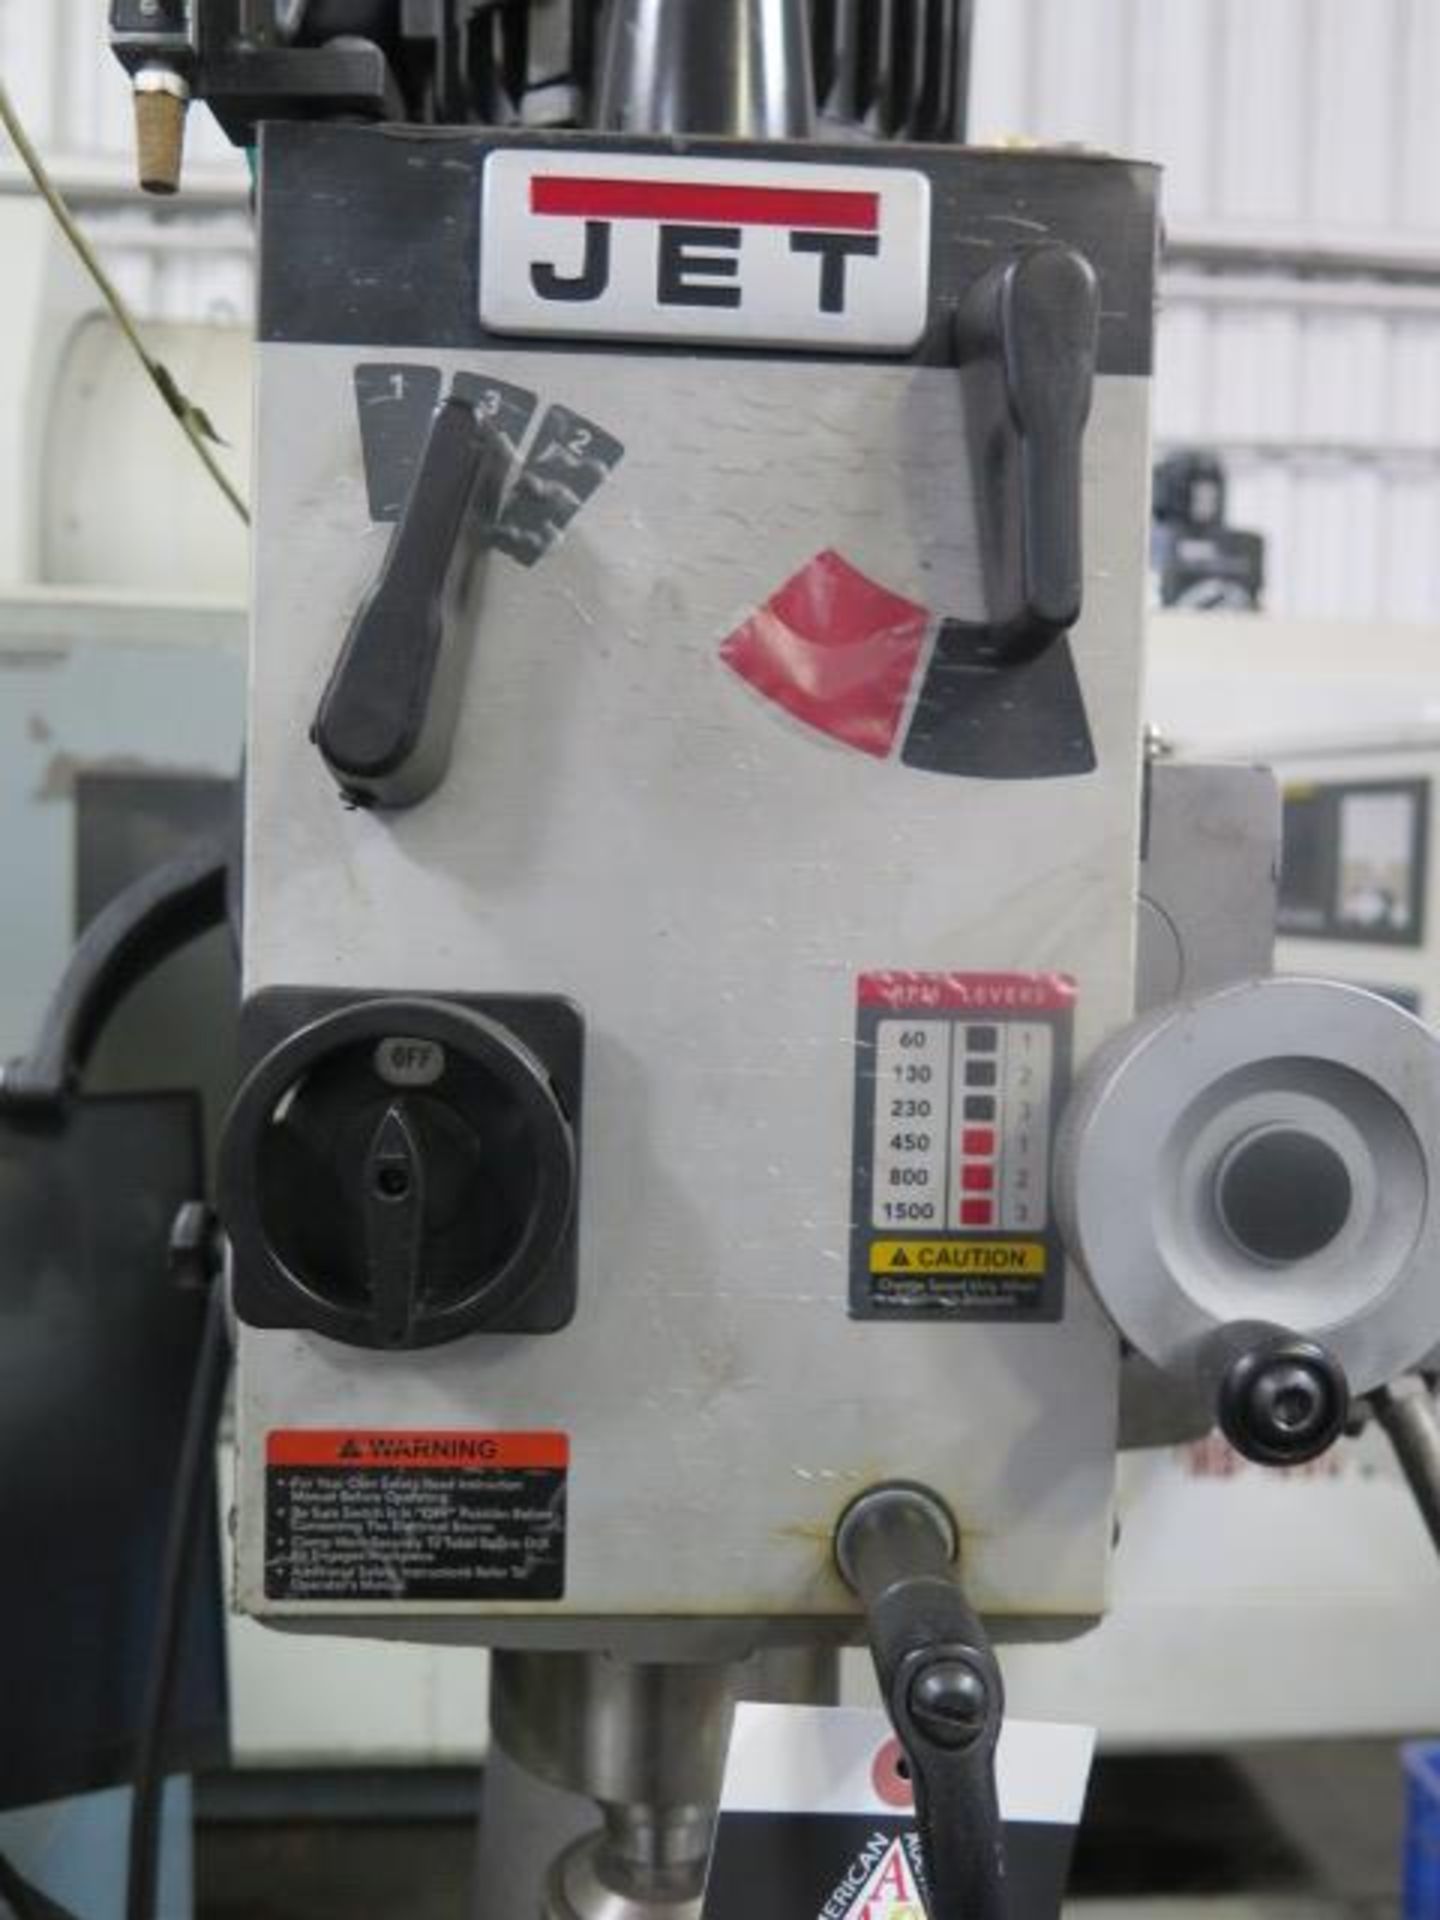 Hines "Dominator" Crank Shaft Balance Drilling Machine w/ Jet Drilling Head SOLD AS-IS - Image 8 of 12